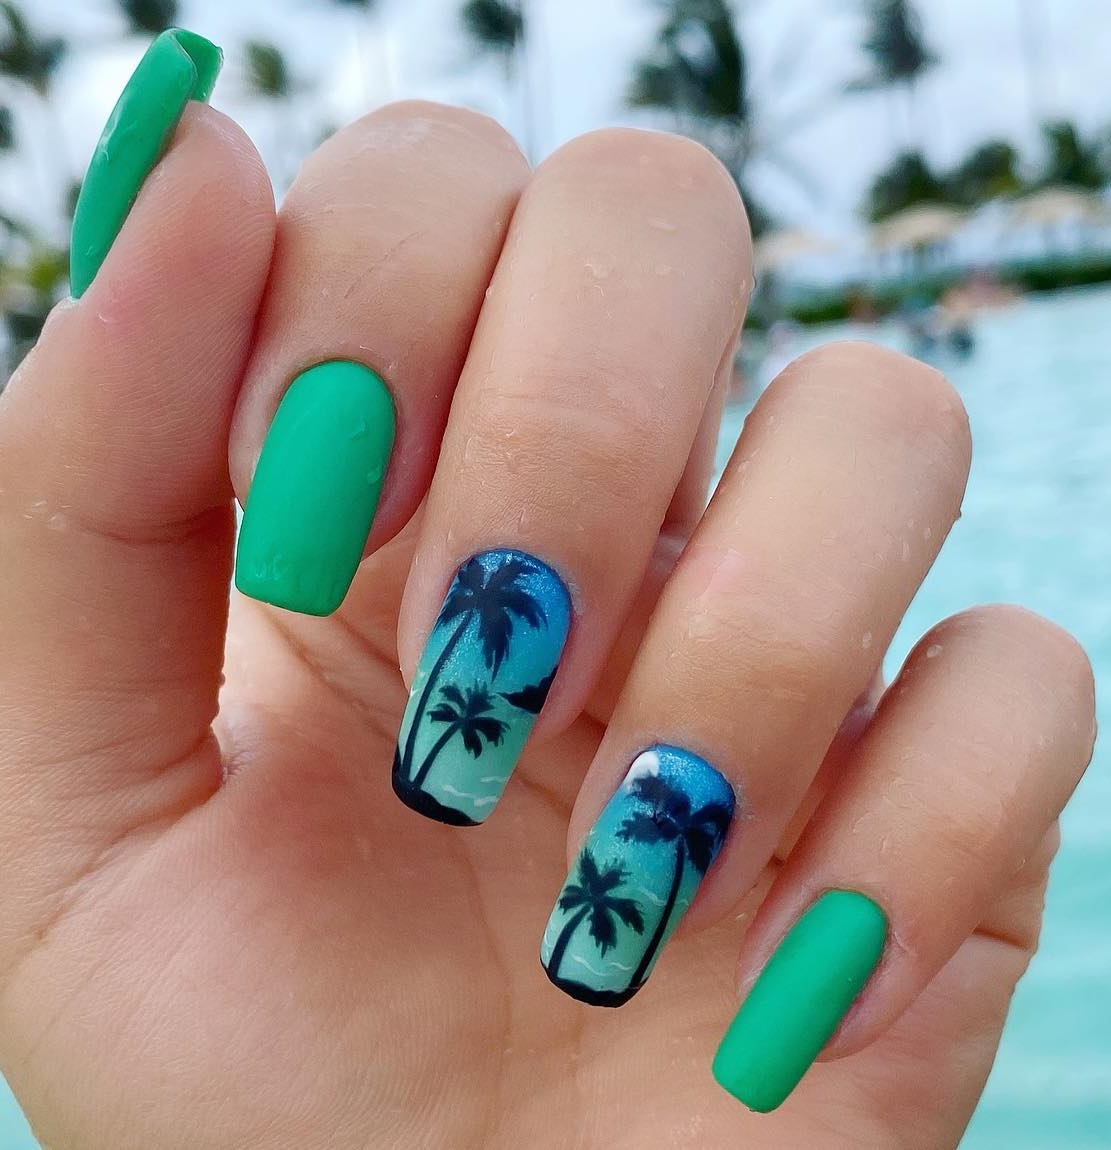 Green Nails with Palm Trees